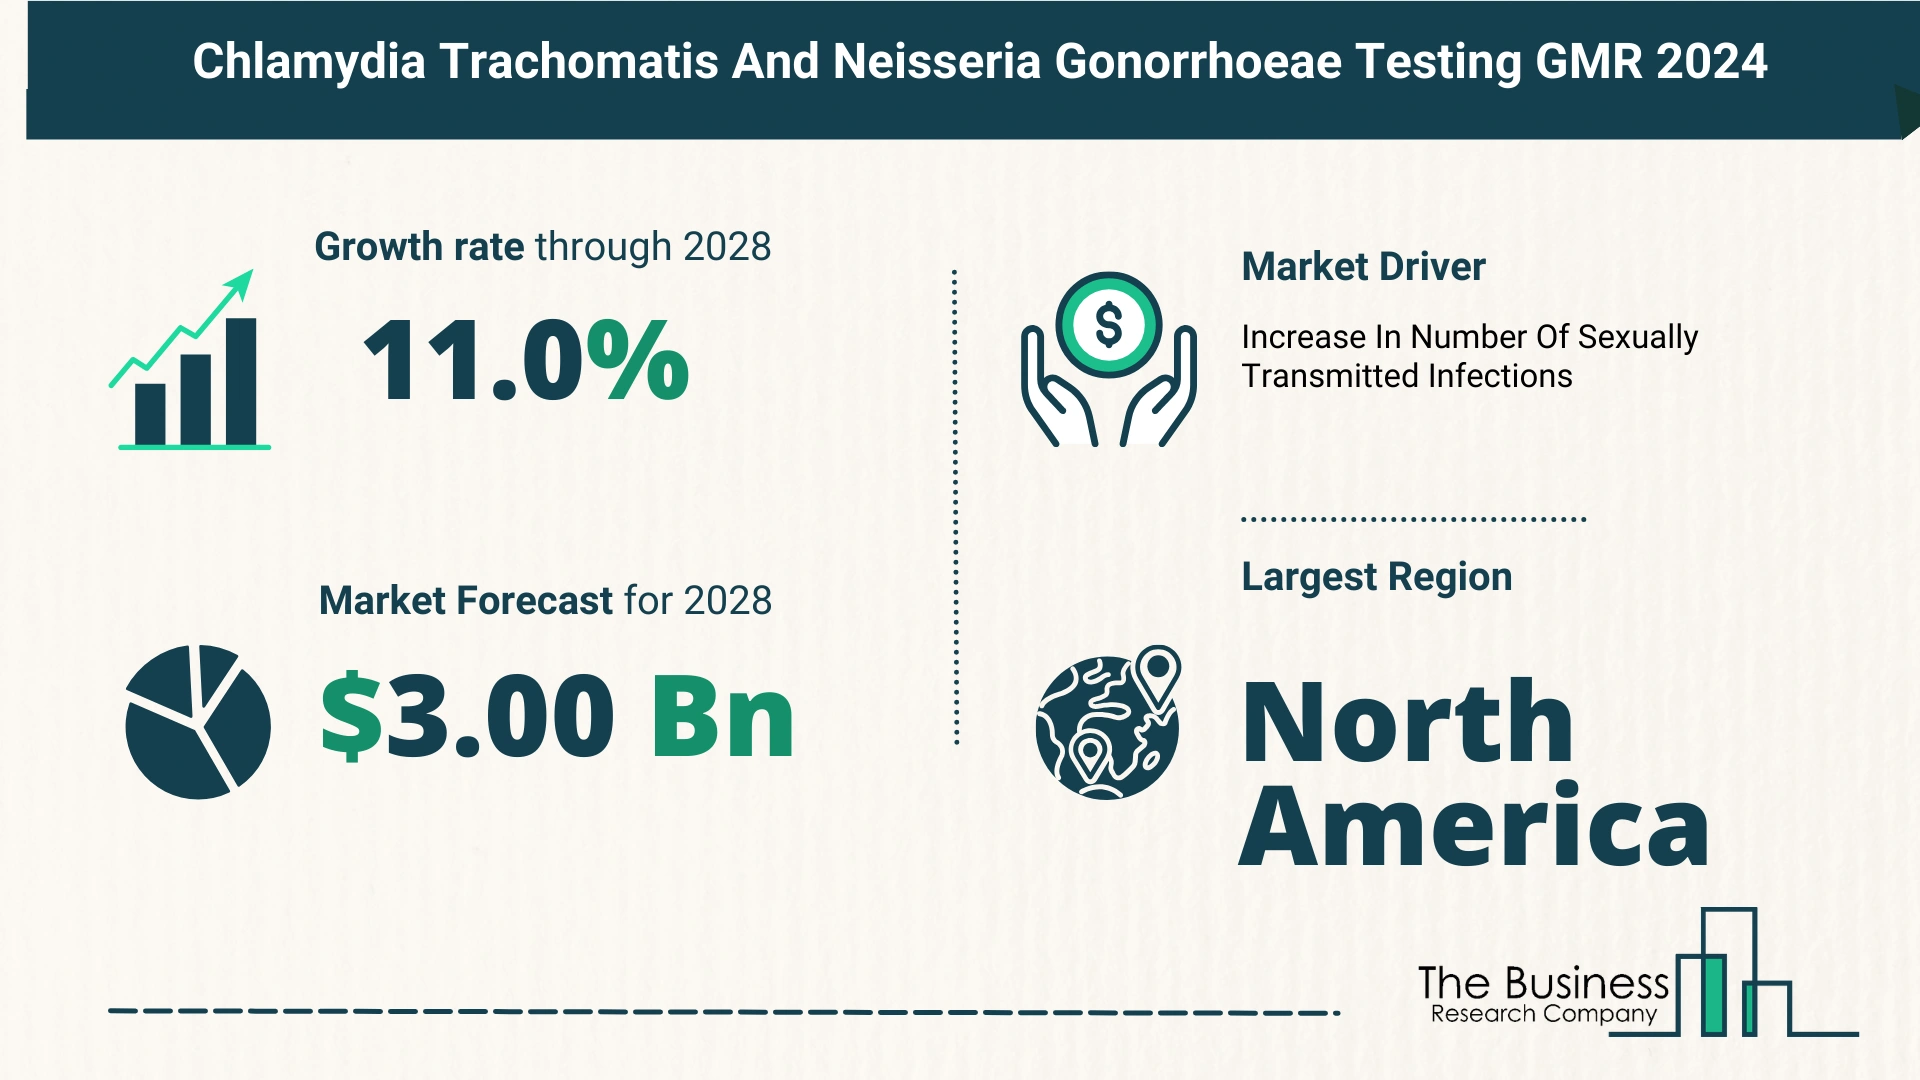 Chlamydia Trachomatis (CT) And Neisseria Gonorrhoeae (NG) Testing Market Forecast Until 2033 – Estimated Market Size And Growth Rate